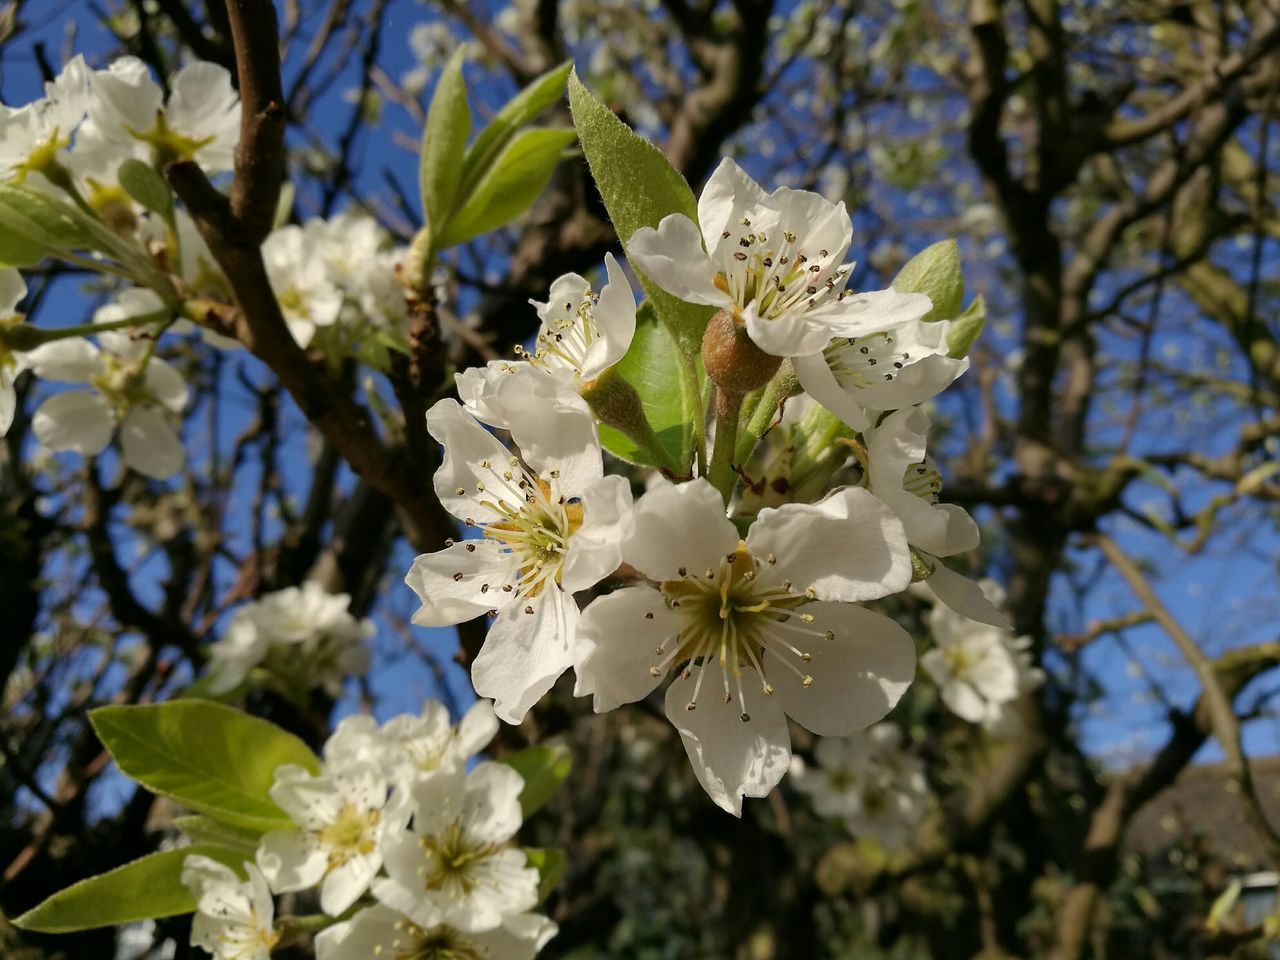 CLOSE-UP OF APPLE BLOSSOMS IN SPRING